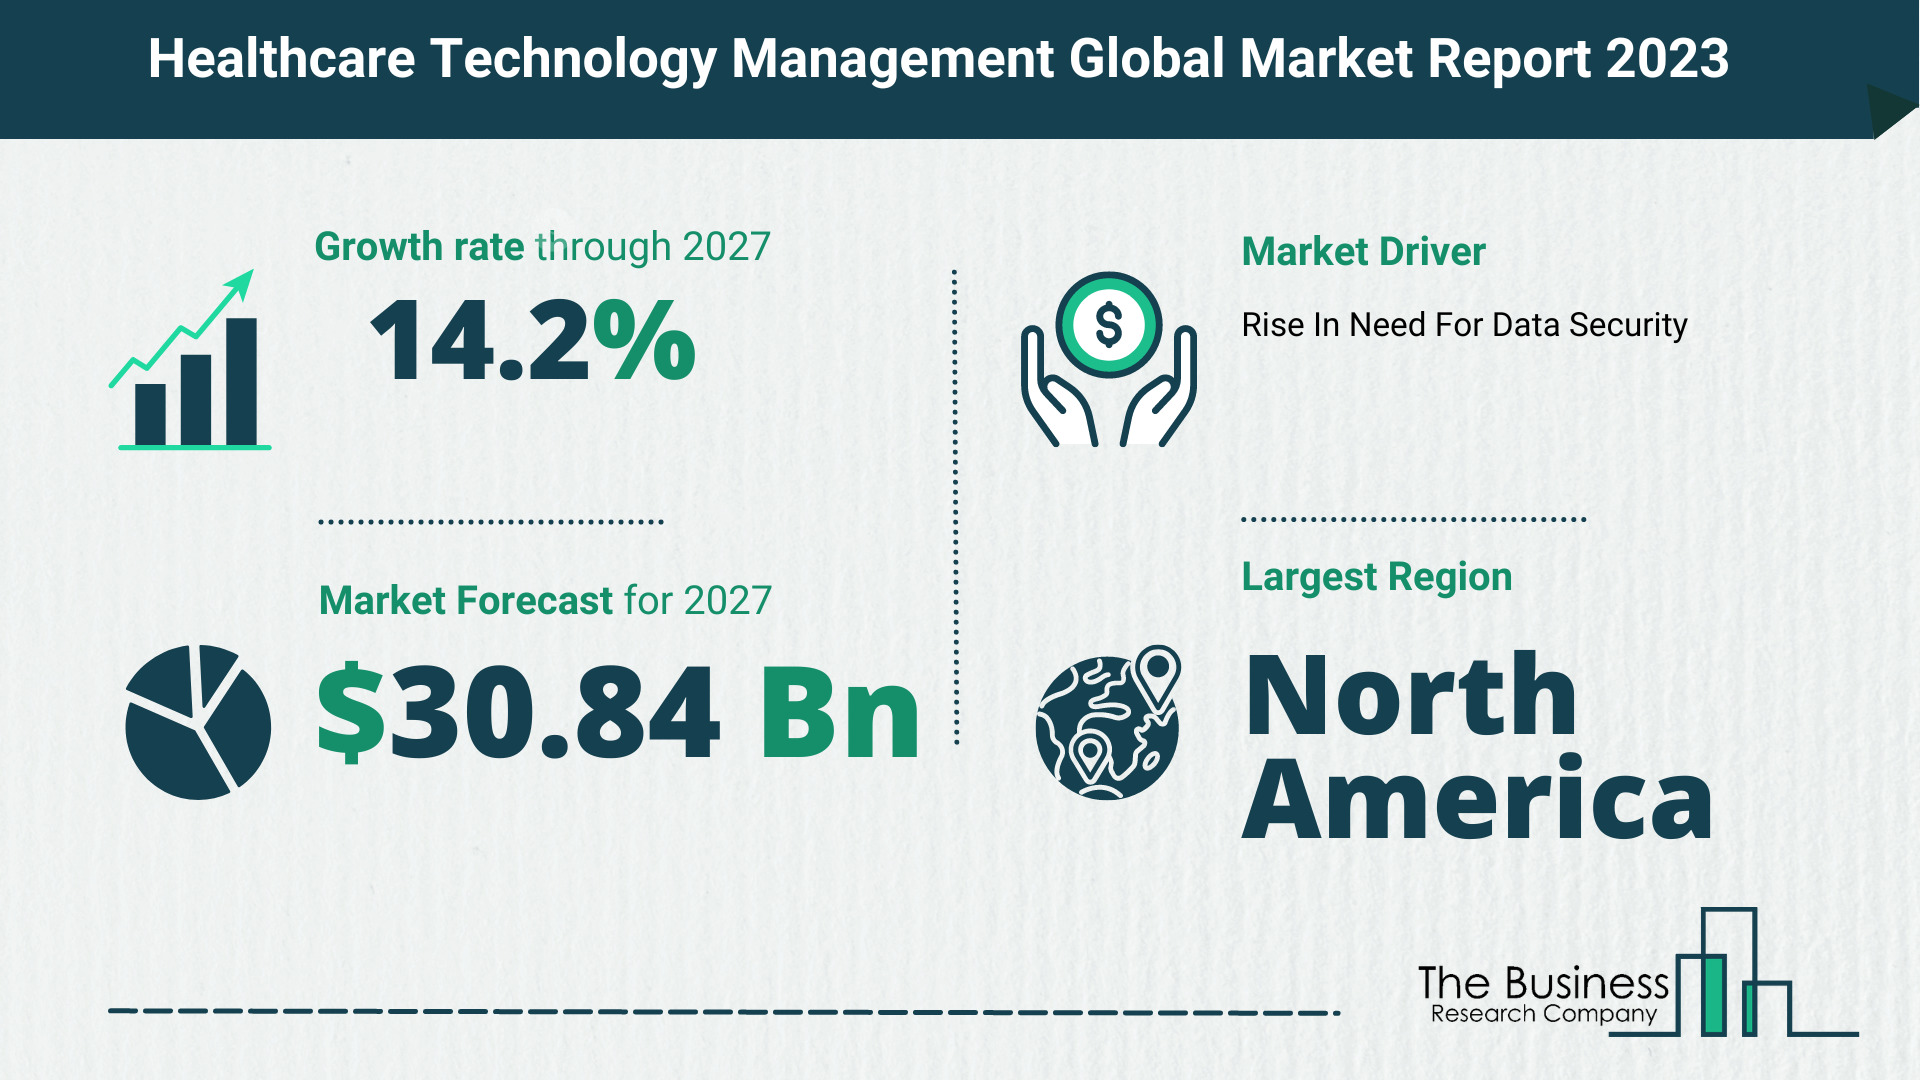 How Will The Healthcare Technology Management Market Globally Expand In 2023?